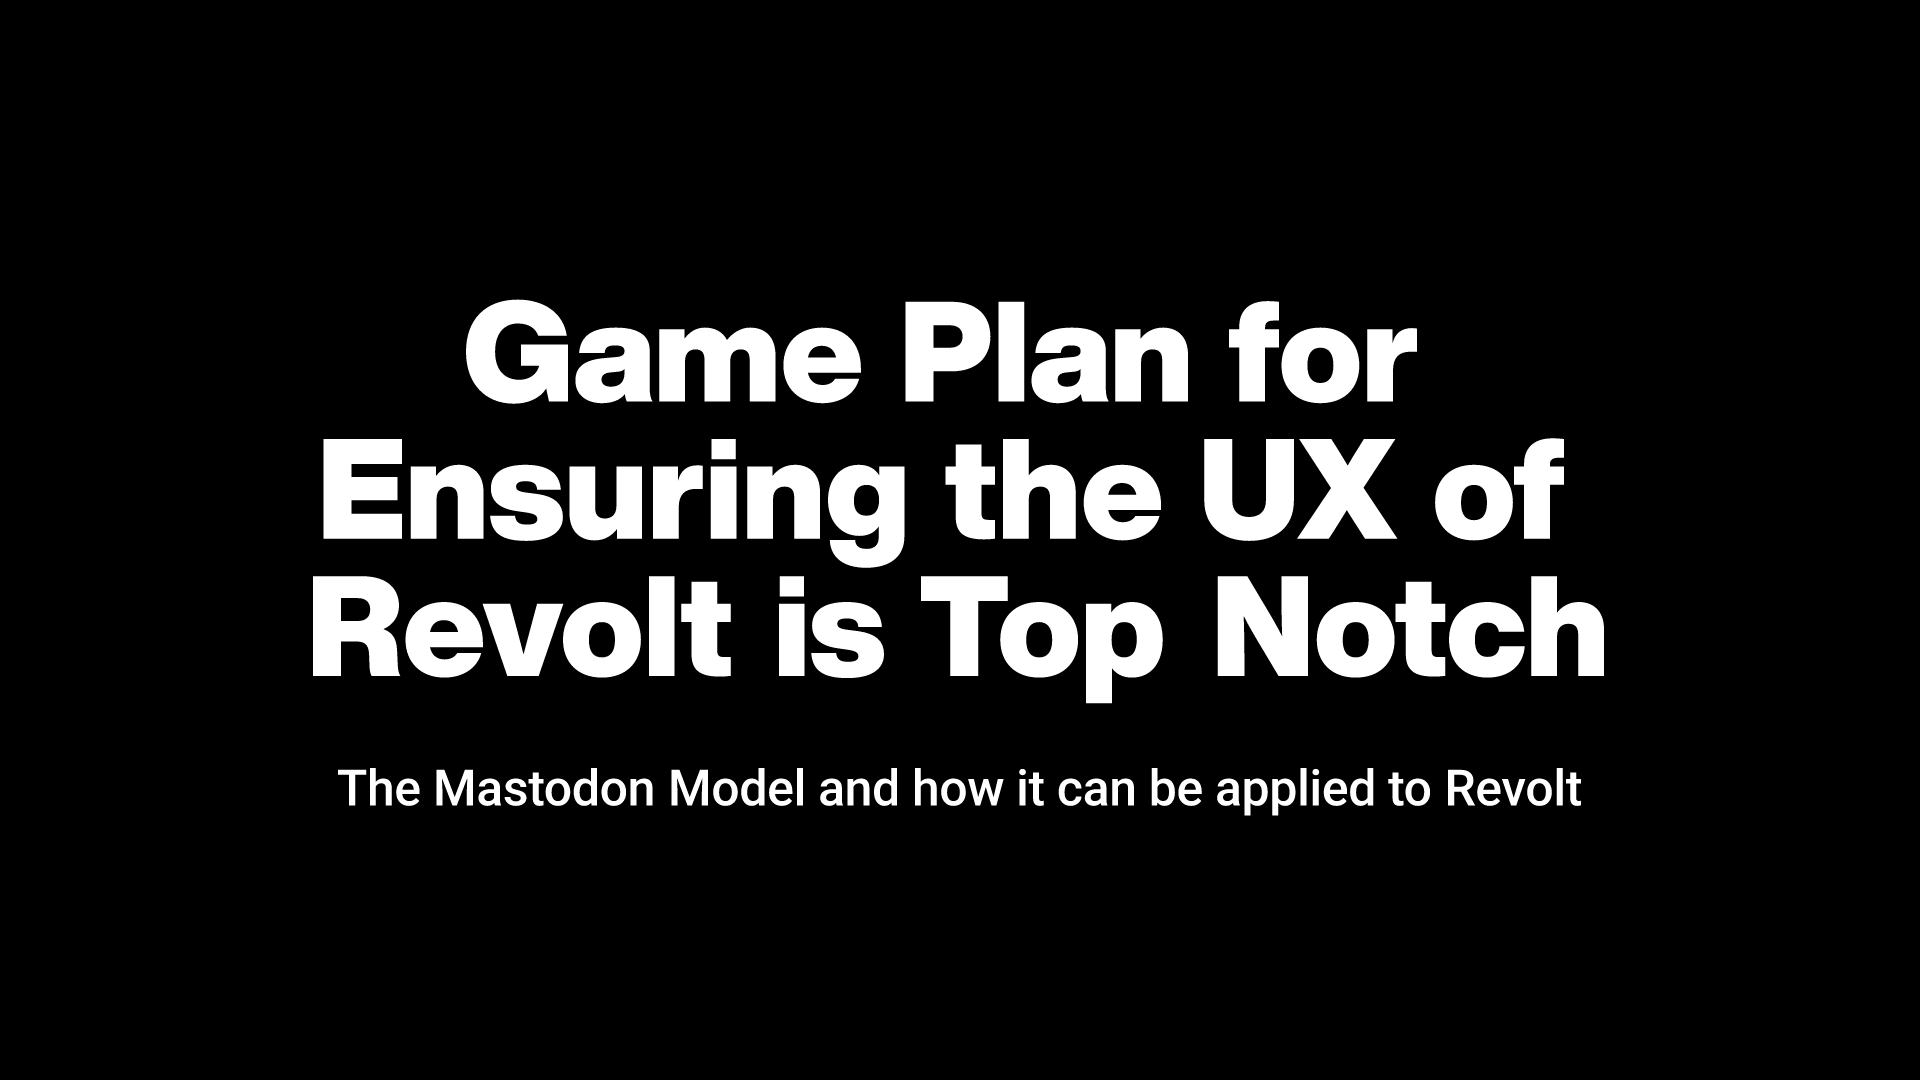 Game Plan for Ensuring the UX of Revolt is Top Notch